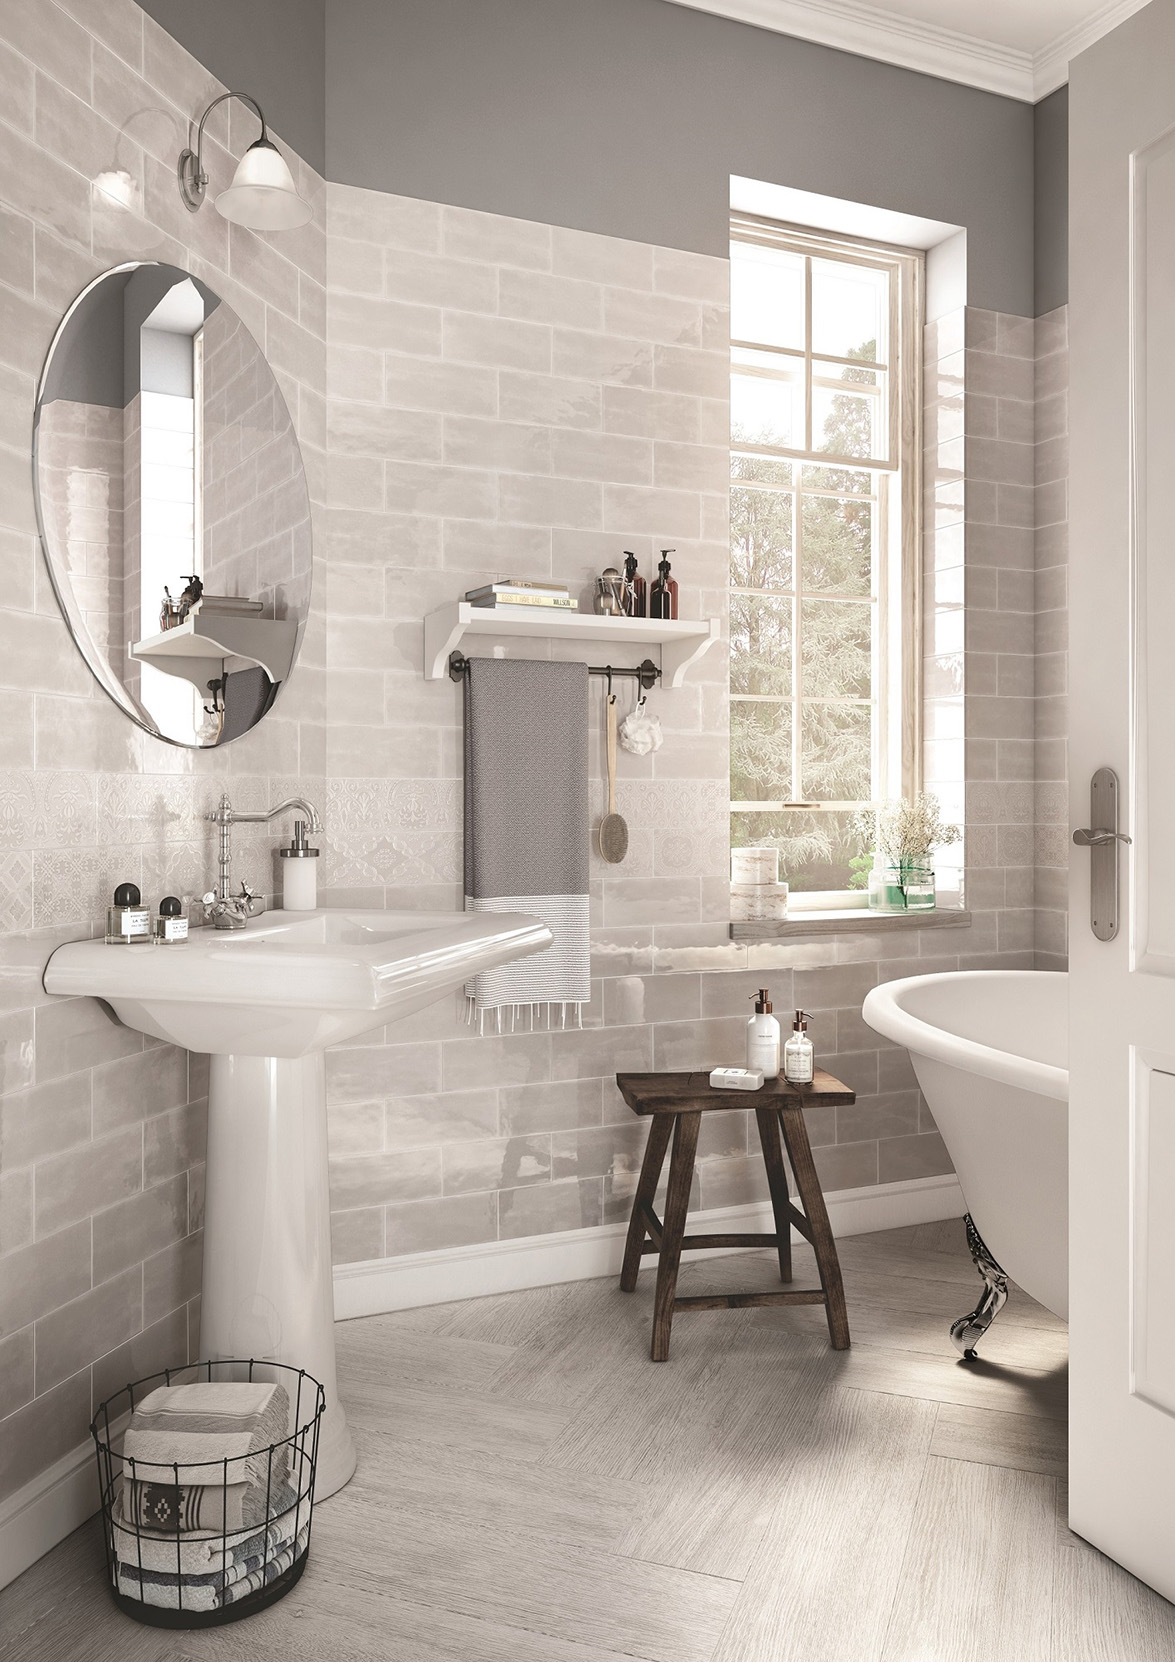 The Latest Bathroom Tile Trends for 2017! - Portland Direct Tile & Marble